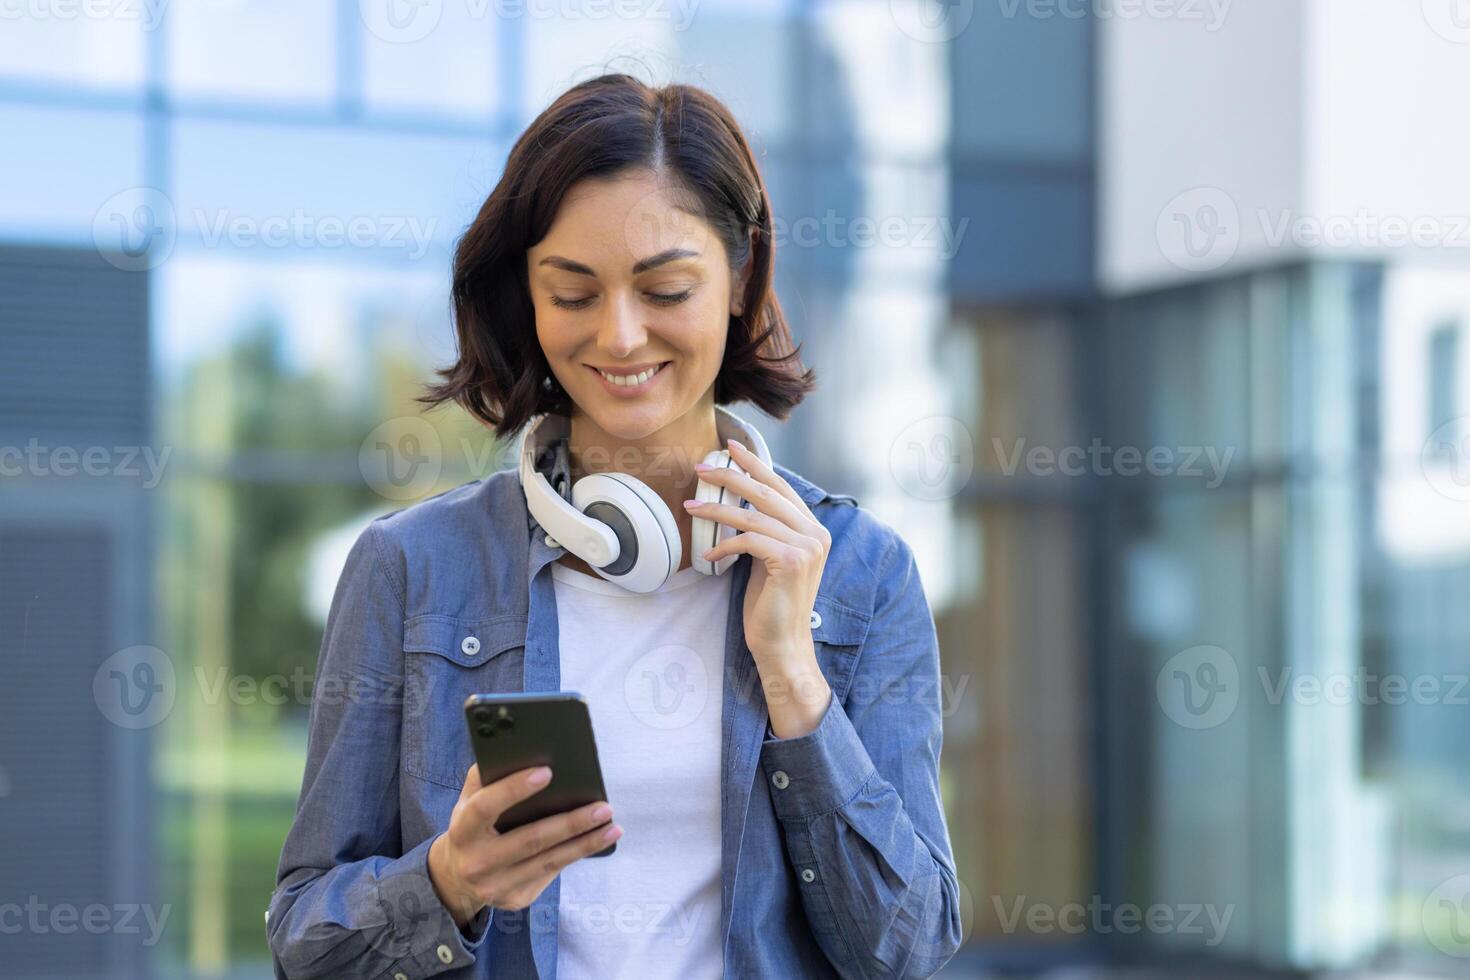 A young female student with a cheerful expression uses her smartphone and wears headphones, standing outdoors near a modern building. Concept of technology in daily life. photo